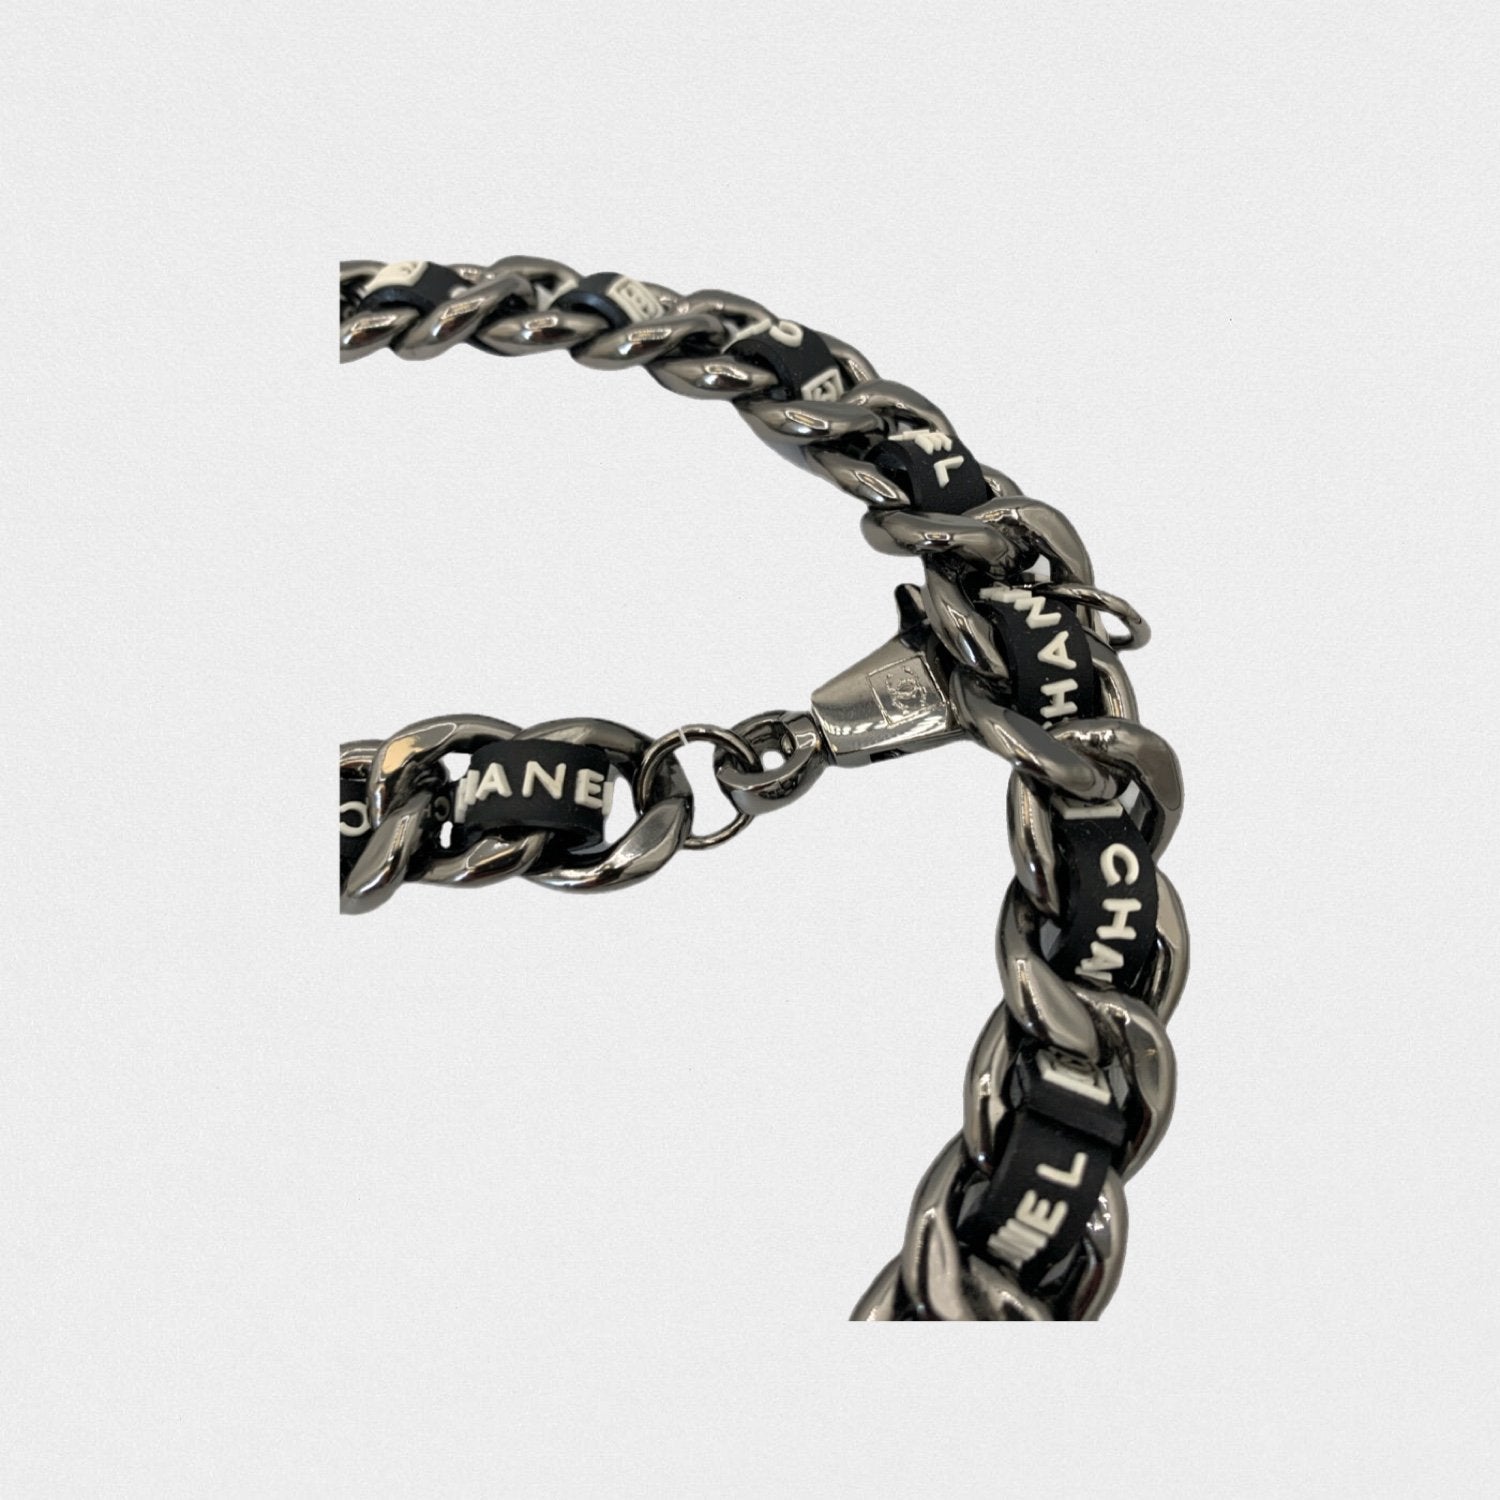 Chanel chain - 2010s second hand vintage Lysis